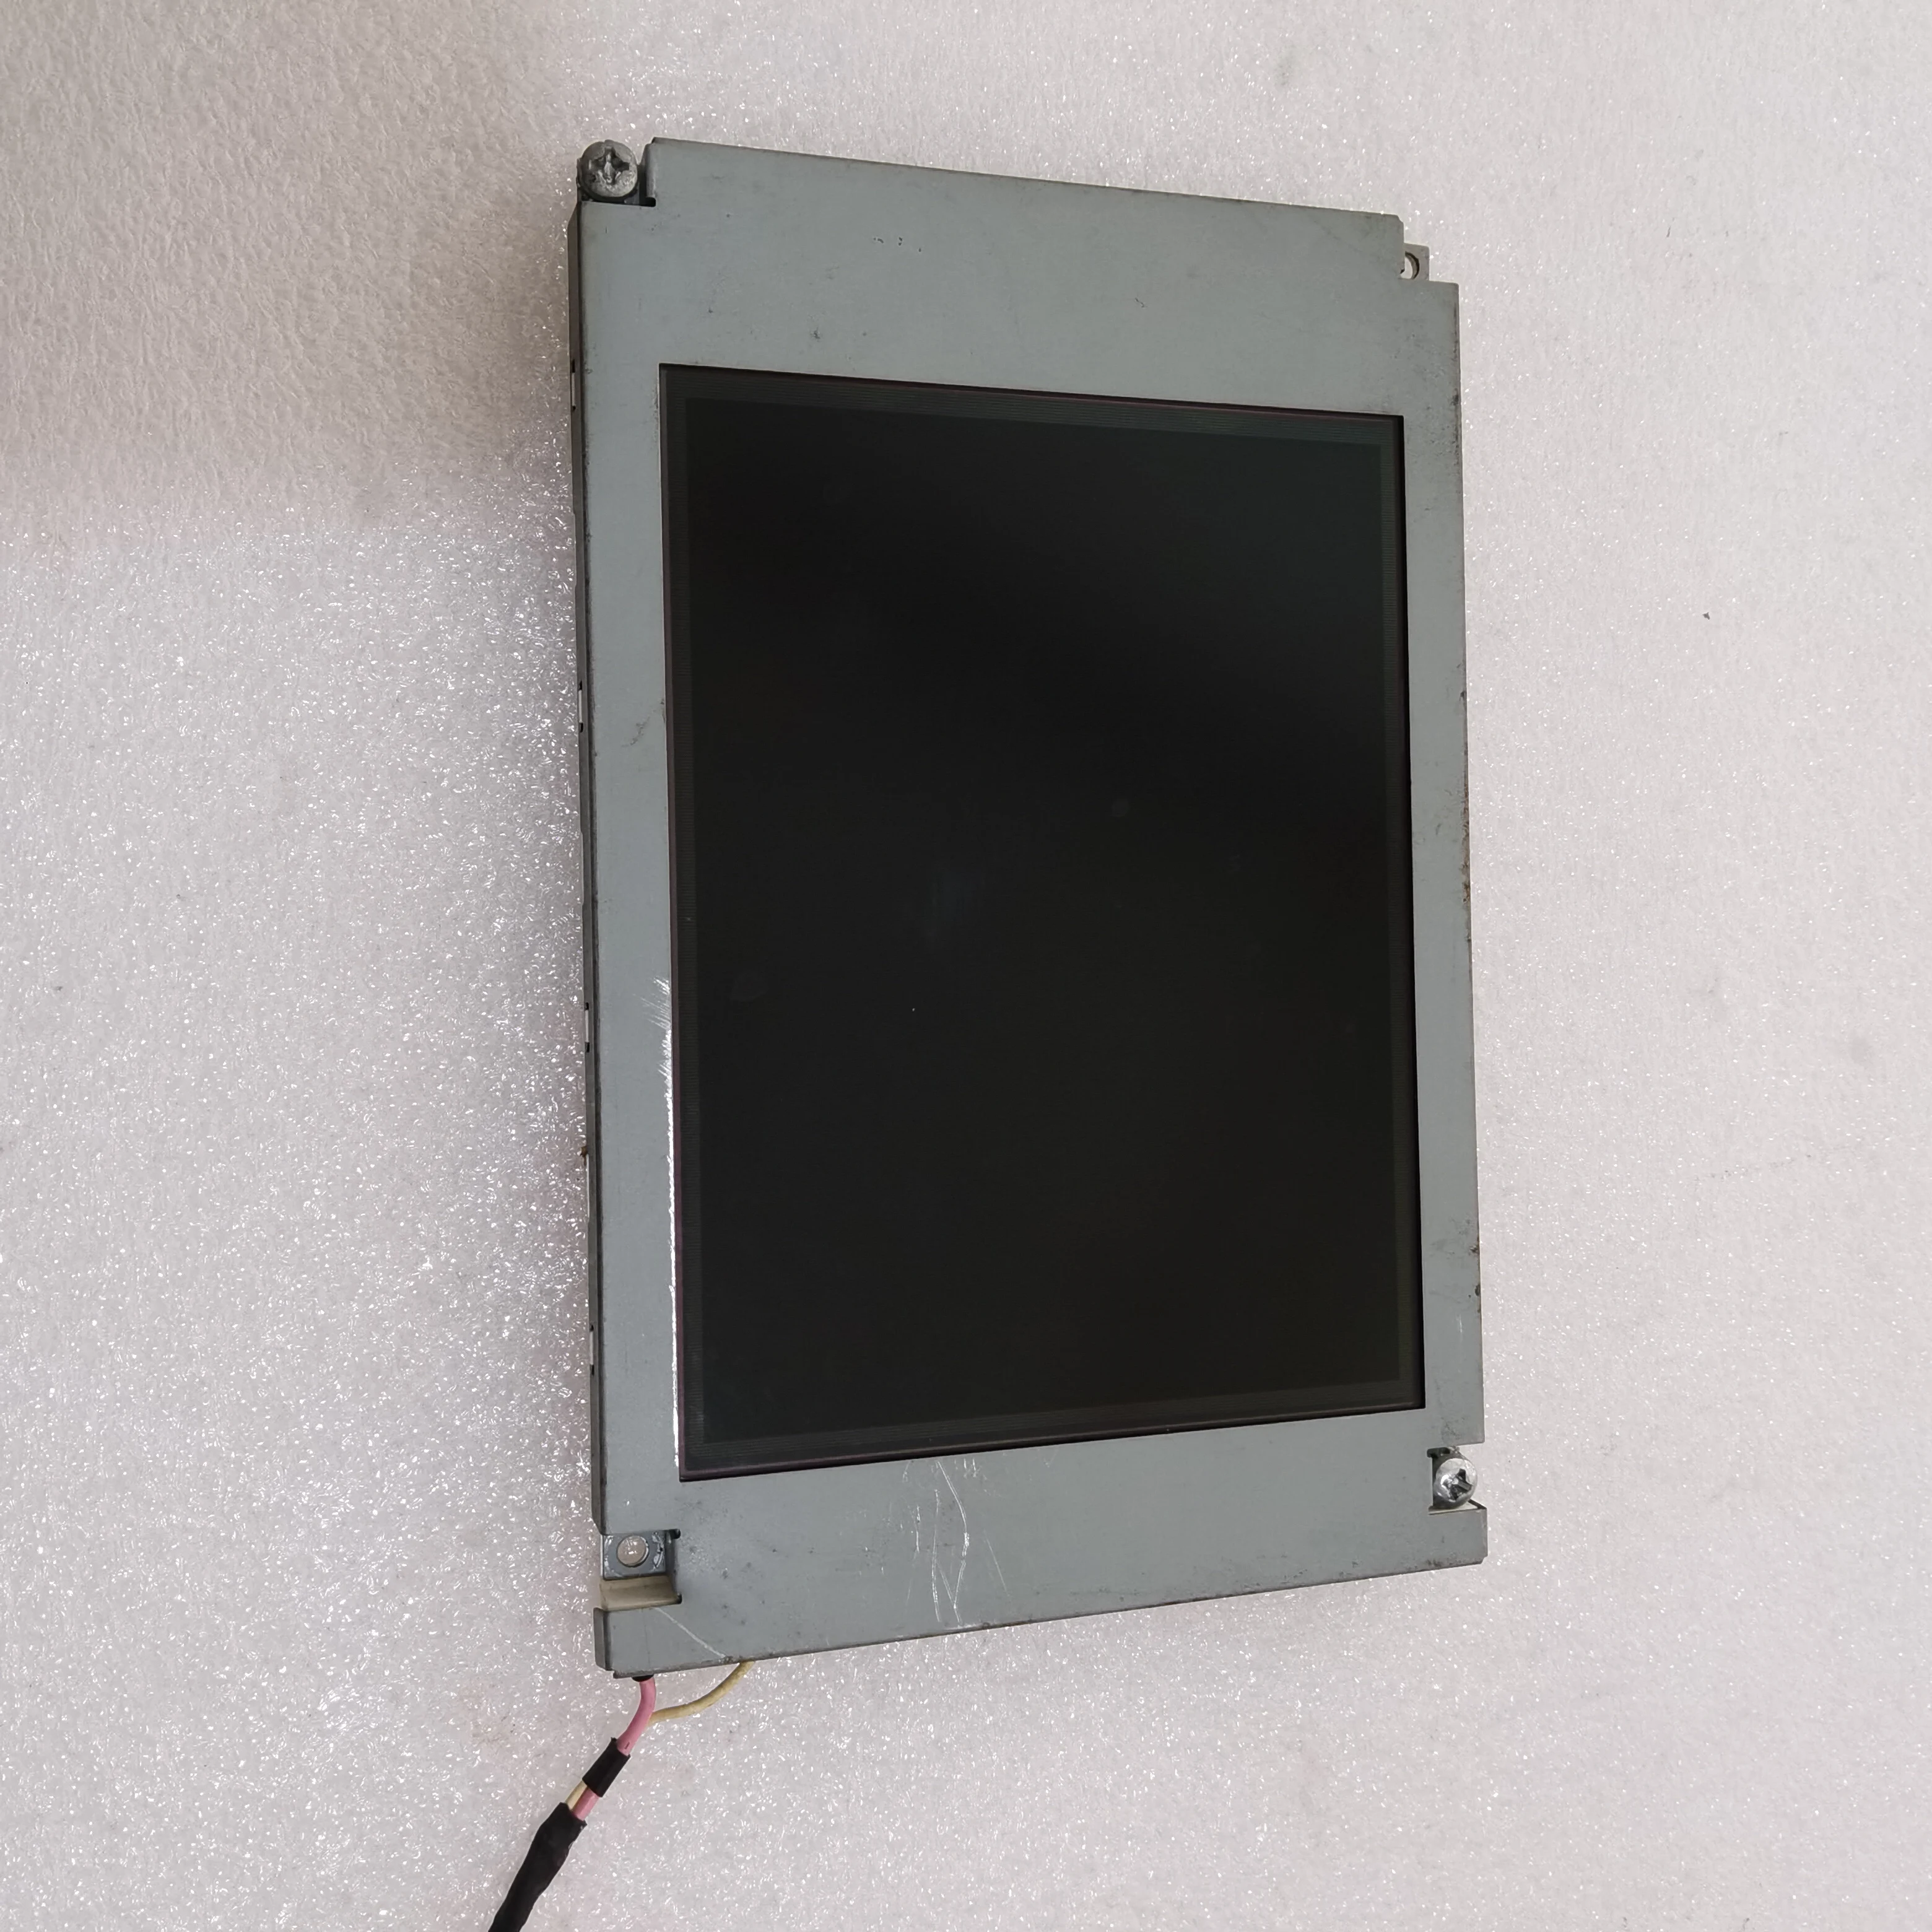 

Original 5.7 inch LCD MC57T01H 100% original industrial equipment LCD display Perfect working Fully tested